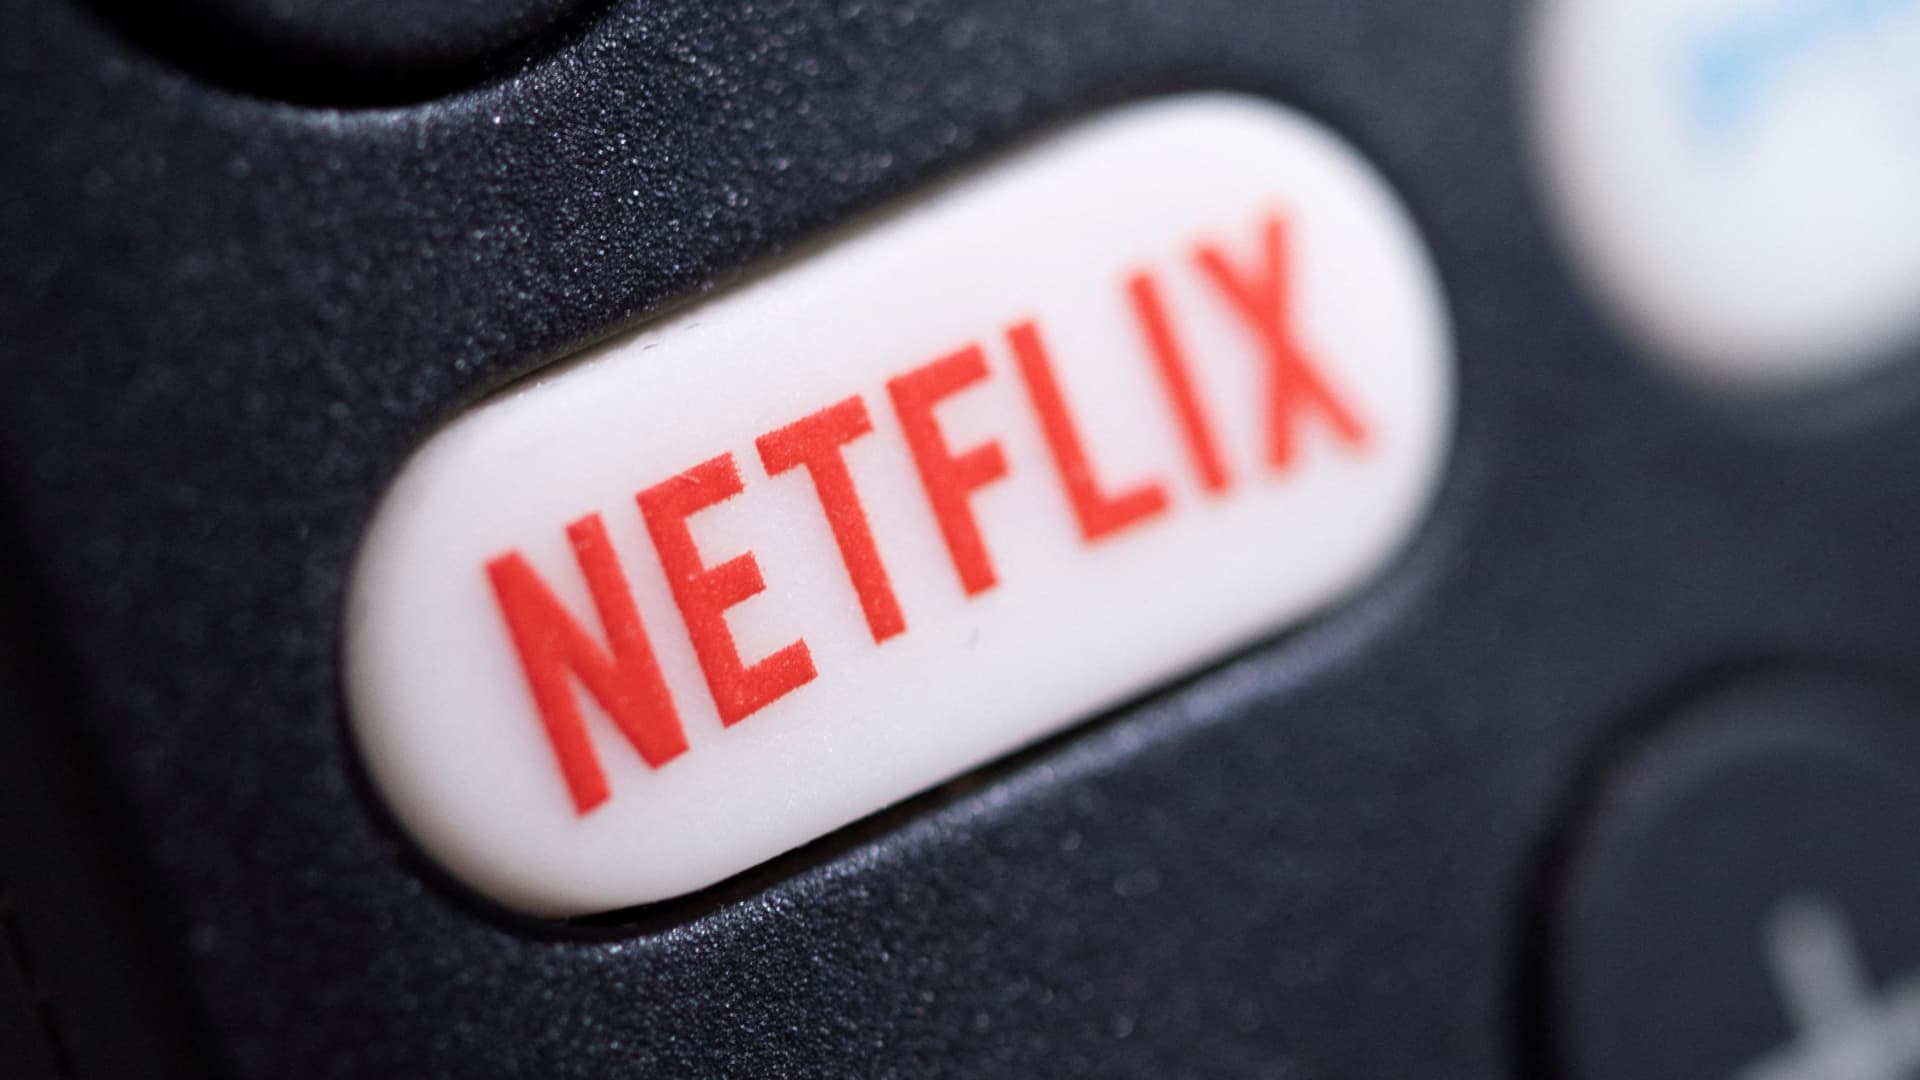 Netflix partners with Microsoft on ad-supported subscription plan